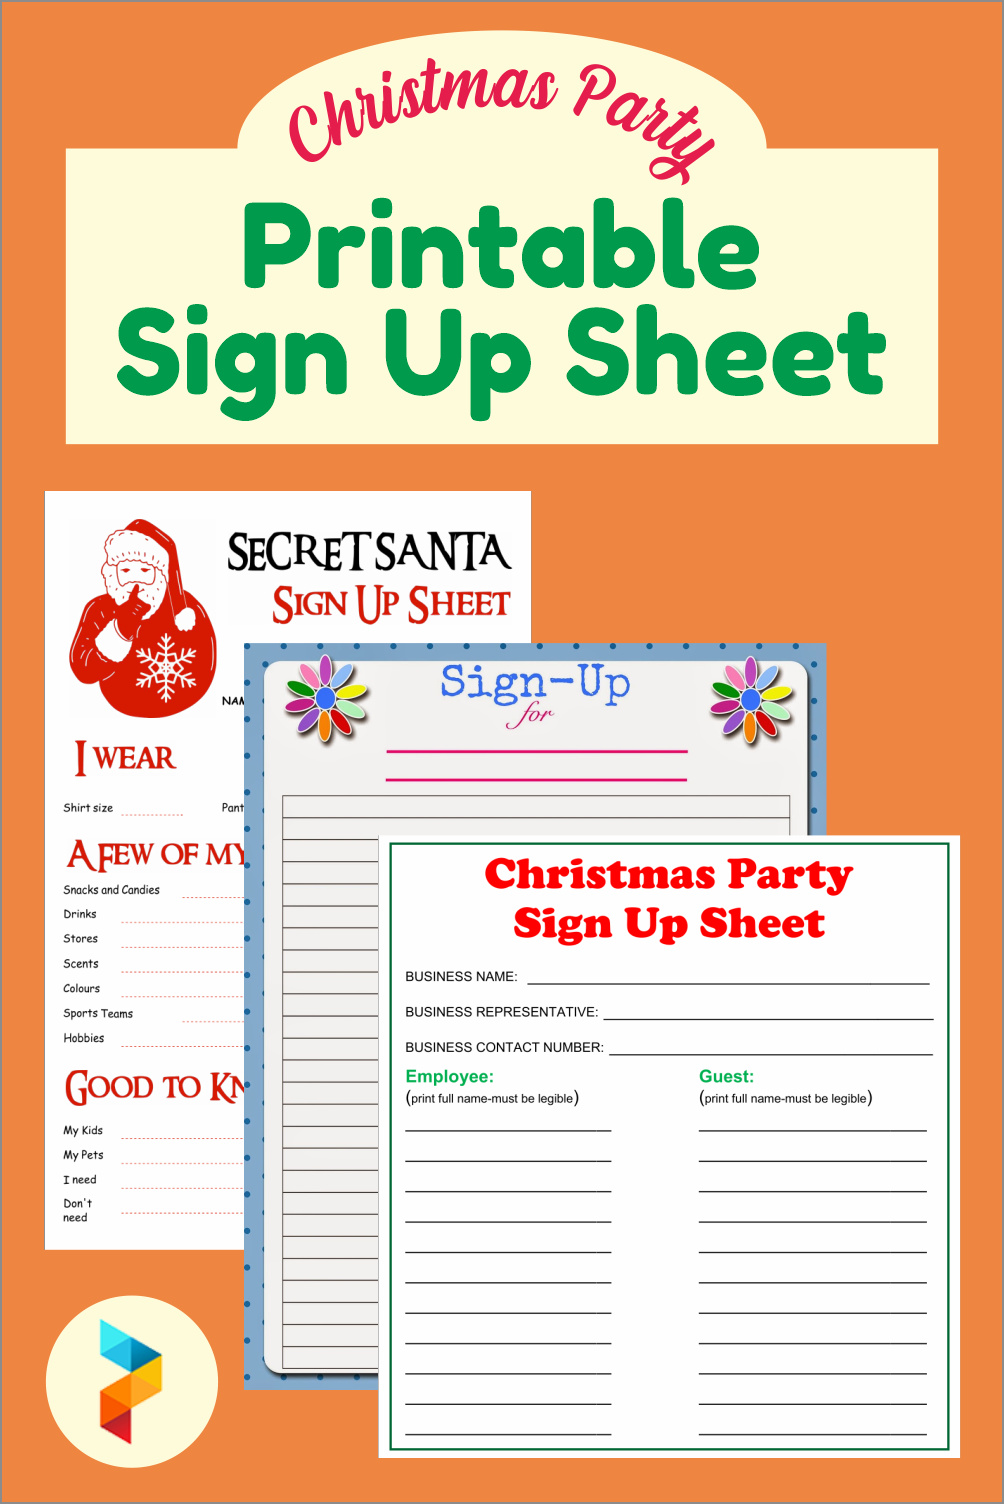 example of Christmas party sign up sheet template